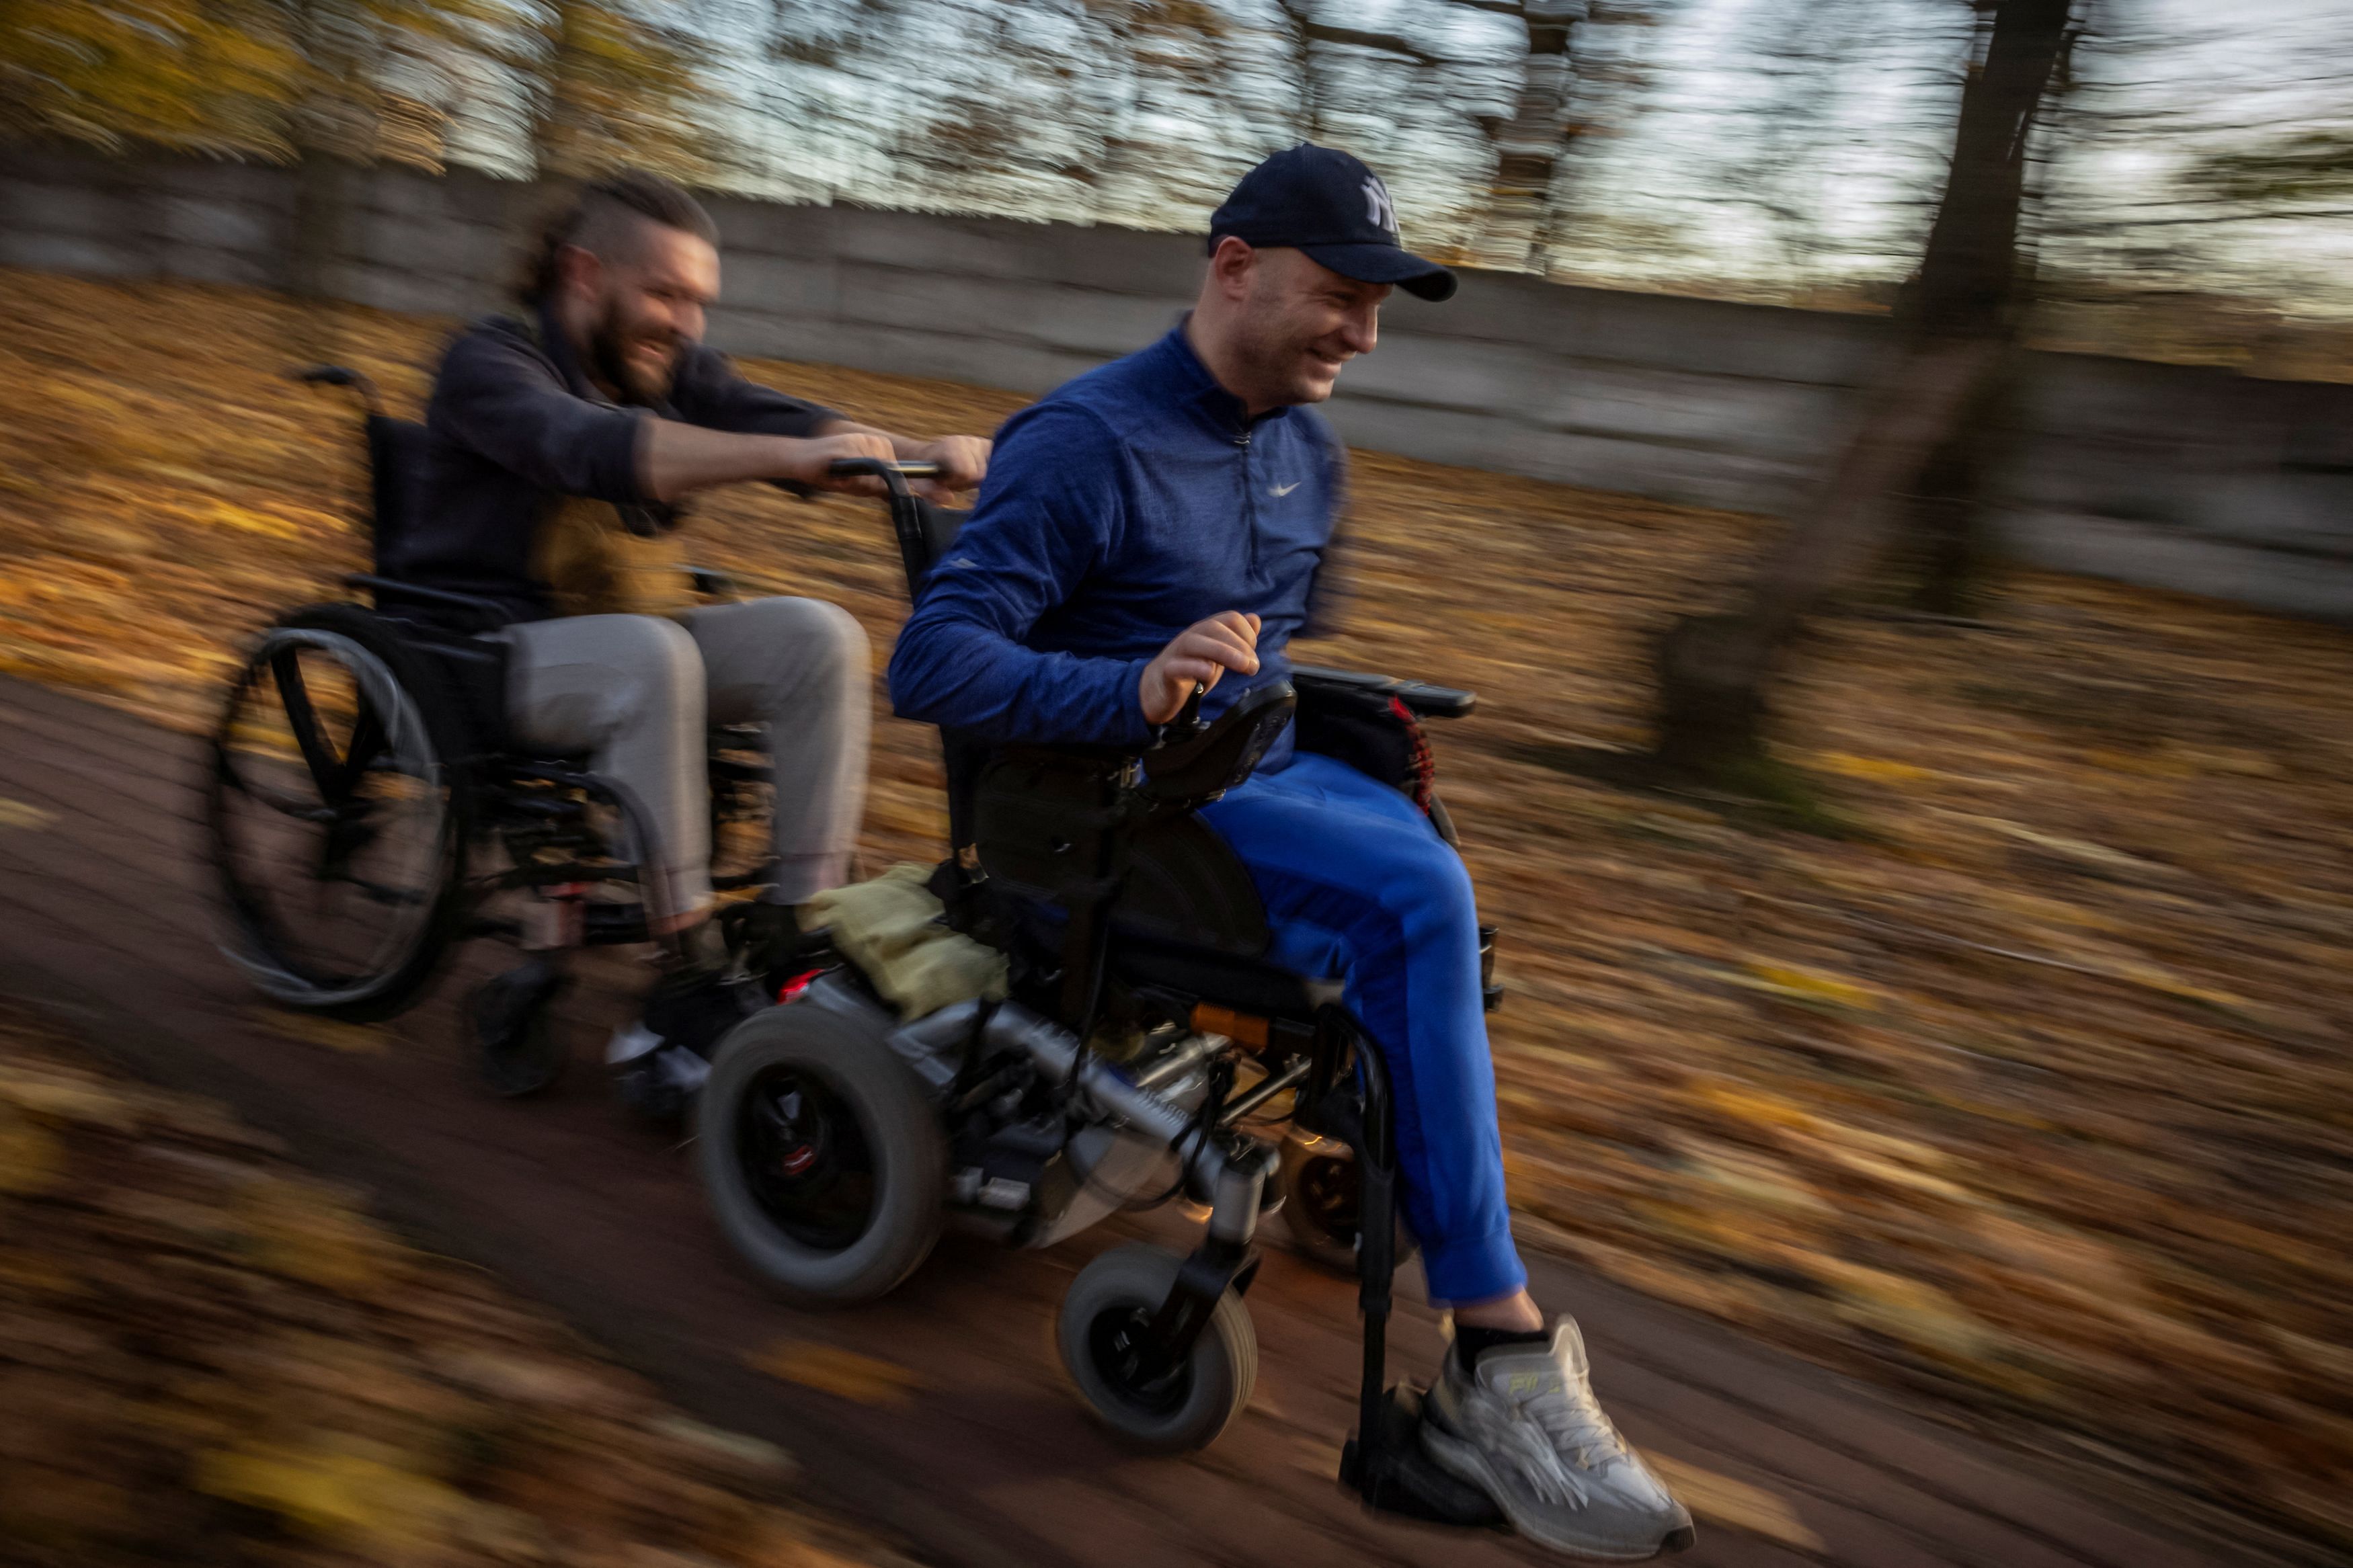 Oleksandr Revtiukh , 33, a Ukrainian serviceman who lost his left arm and most of his left leg in multiple mine blasts in 2023, pulls fellow wheelchair-bound veteran Bohdan Tanchyn with his electric wheelchair, in the garden of the Recovery Rehabilitation Center, amid Russia's attack on Ukraine, in Kyiv, Ukraine October 31, 2023. Eight months after losing his left arm and most of his left leg in mine blasts while fighting in Ukraine, Revtiukh's old life is gone. Only two years ago he had enjoyed a comfortable civilian life as an electronics technician abroad, before he returned to Ukraine to sign up and fight the Russian invasion. Now he has to accept what has happened to him and learn to live without his lost limbs. "It's like being a newborn child," he said. "You've got to get to know the world from scratch." REUTERS/Thomas Peter        SEARCH "THOMAS UKRAINE AMPUTEES" FOR THIS STORY. SEARCH "WIDER IMAGE" FOR ALL STORIES.